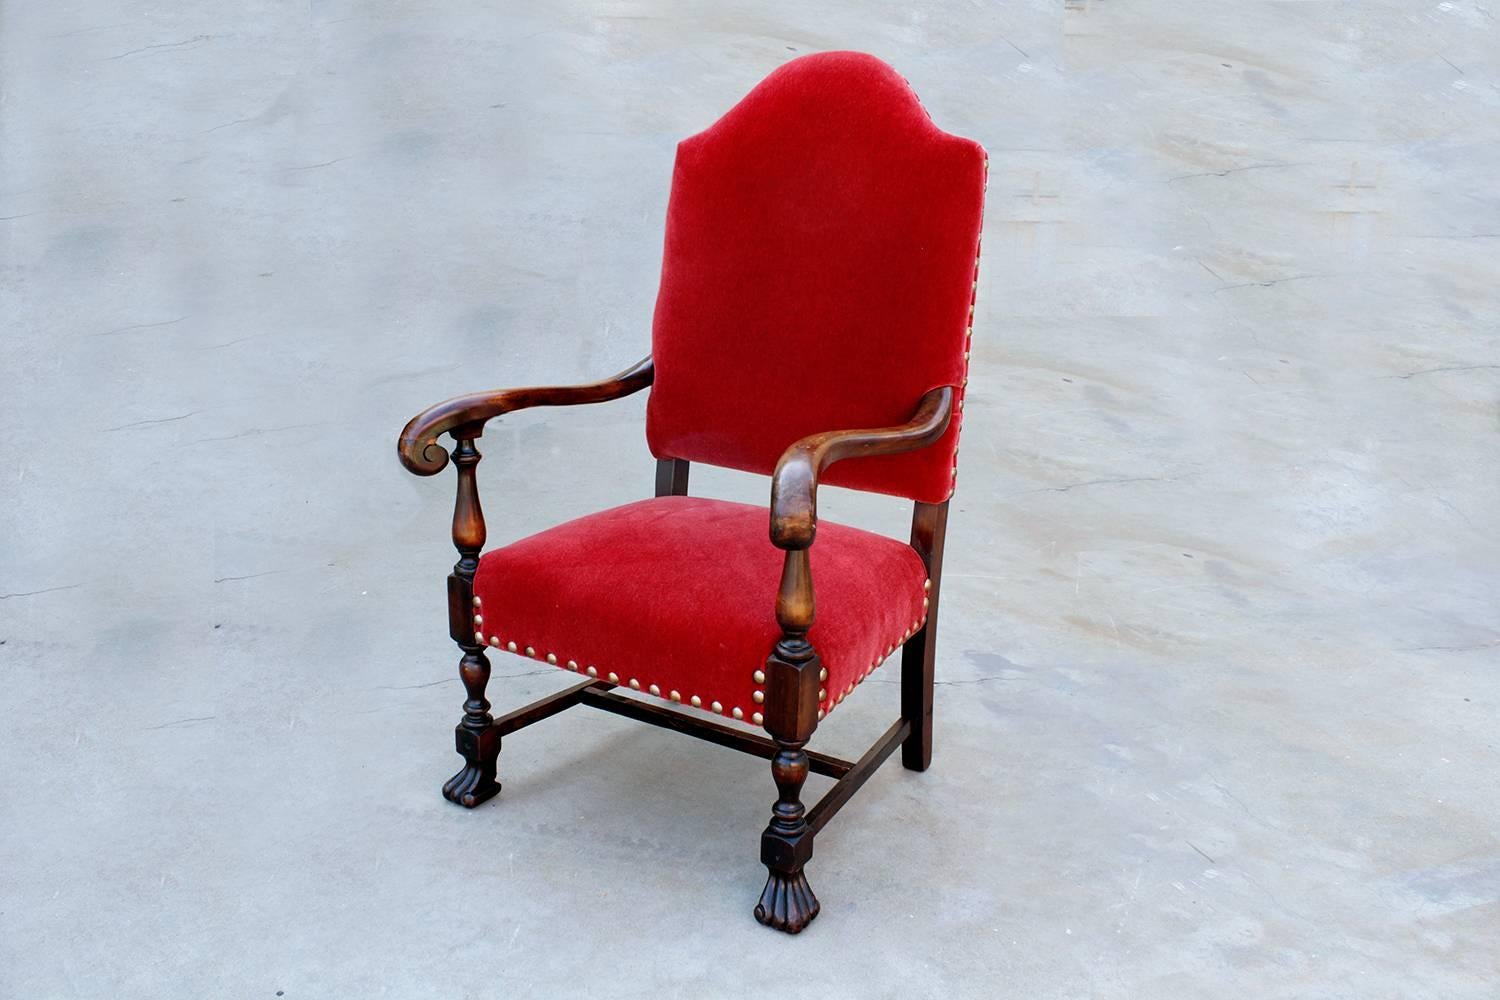 American Empire style armchair with tapered high back and ornate mahogany frame. This statement piece features reconditioned wood paired with rich red mohair upholstery, circa late 19th century.

Dimensions: 27